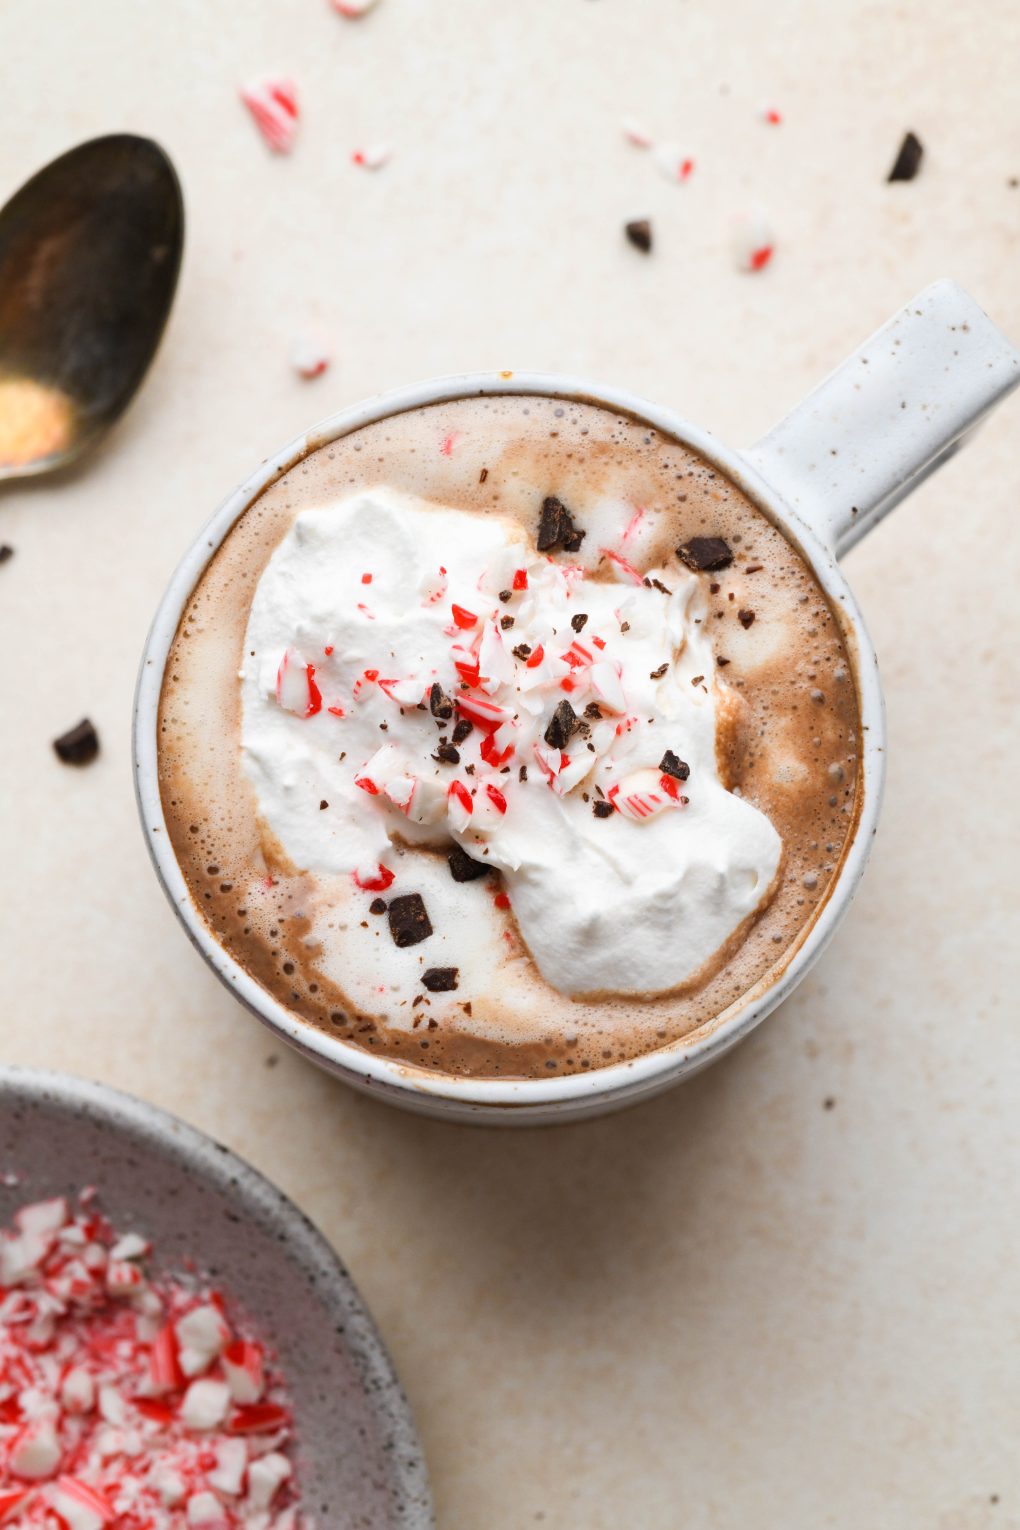 Creamy peppermint hot chocolate topped with whipped cream, crushed candy cane, and shaved chocolate. In a speckled mug on a light brown background. 